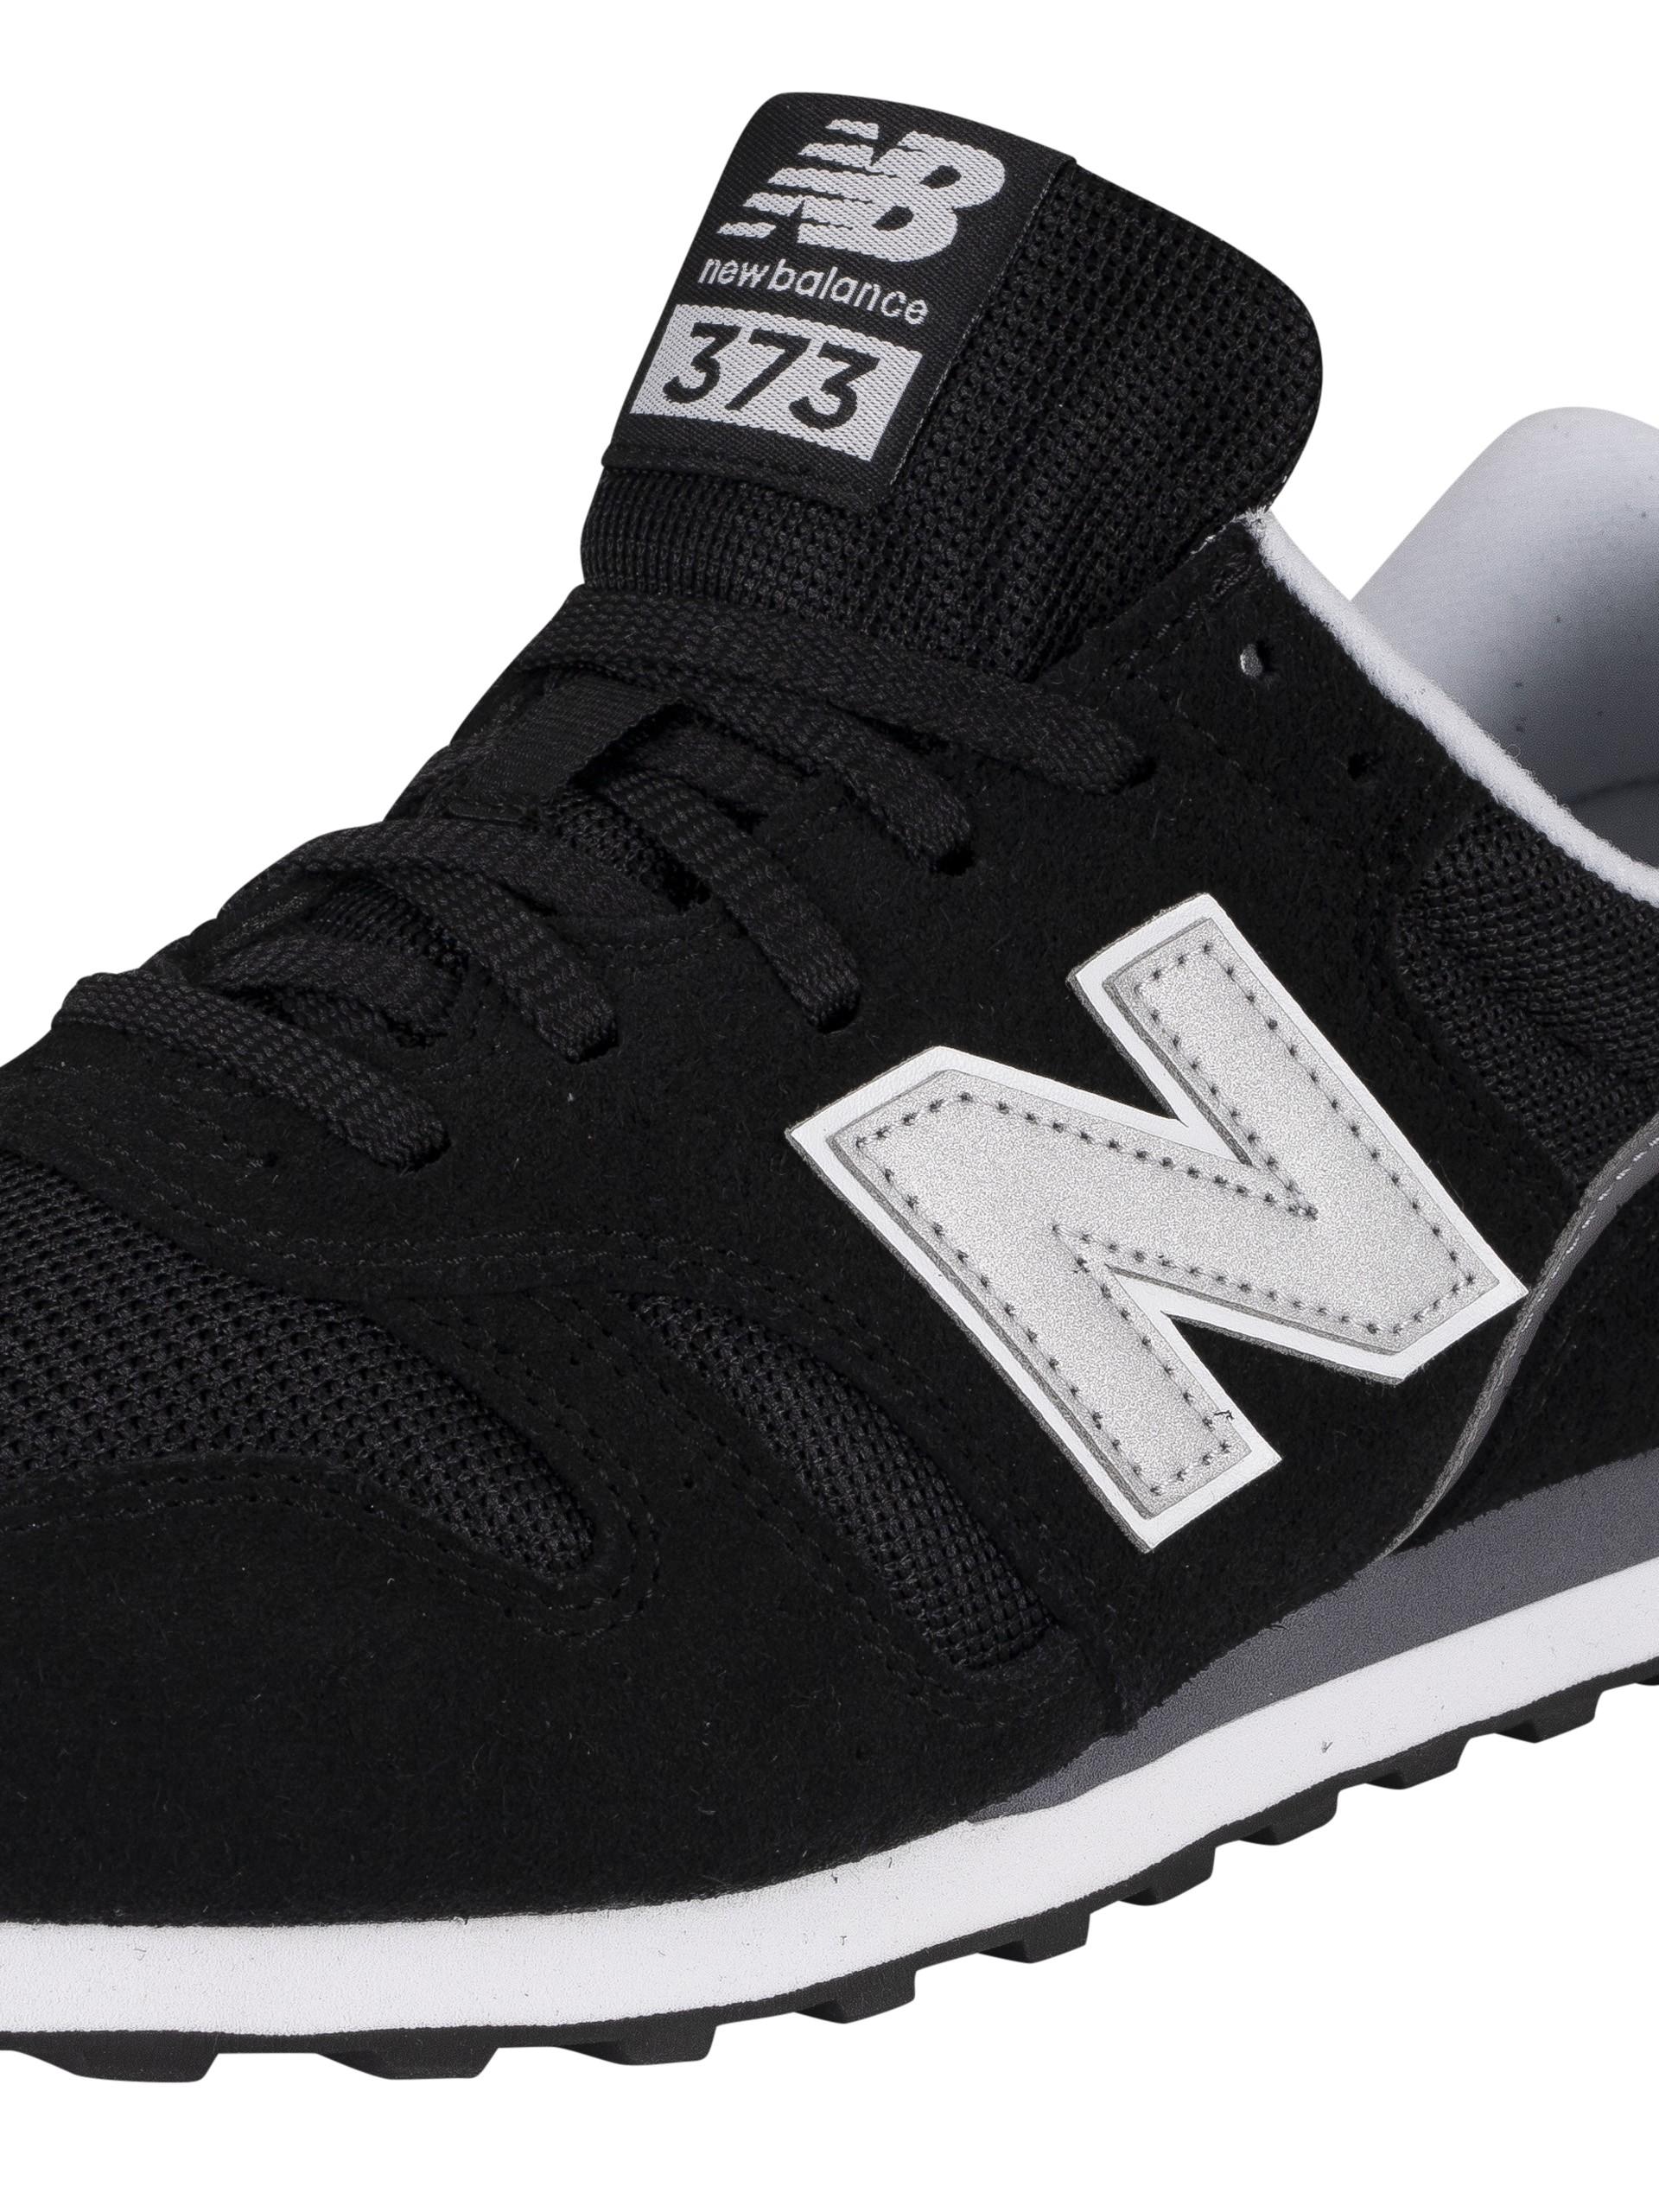 New Balance 373 Suede Trainers in Black/White (Black) for Men | Lyst